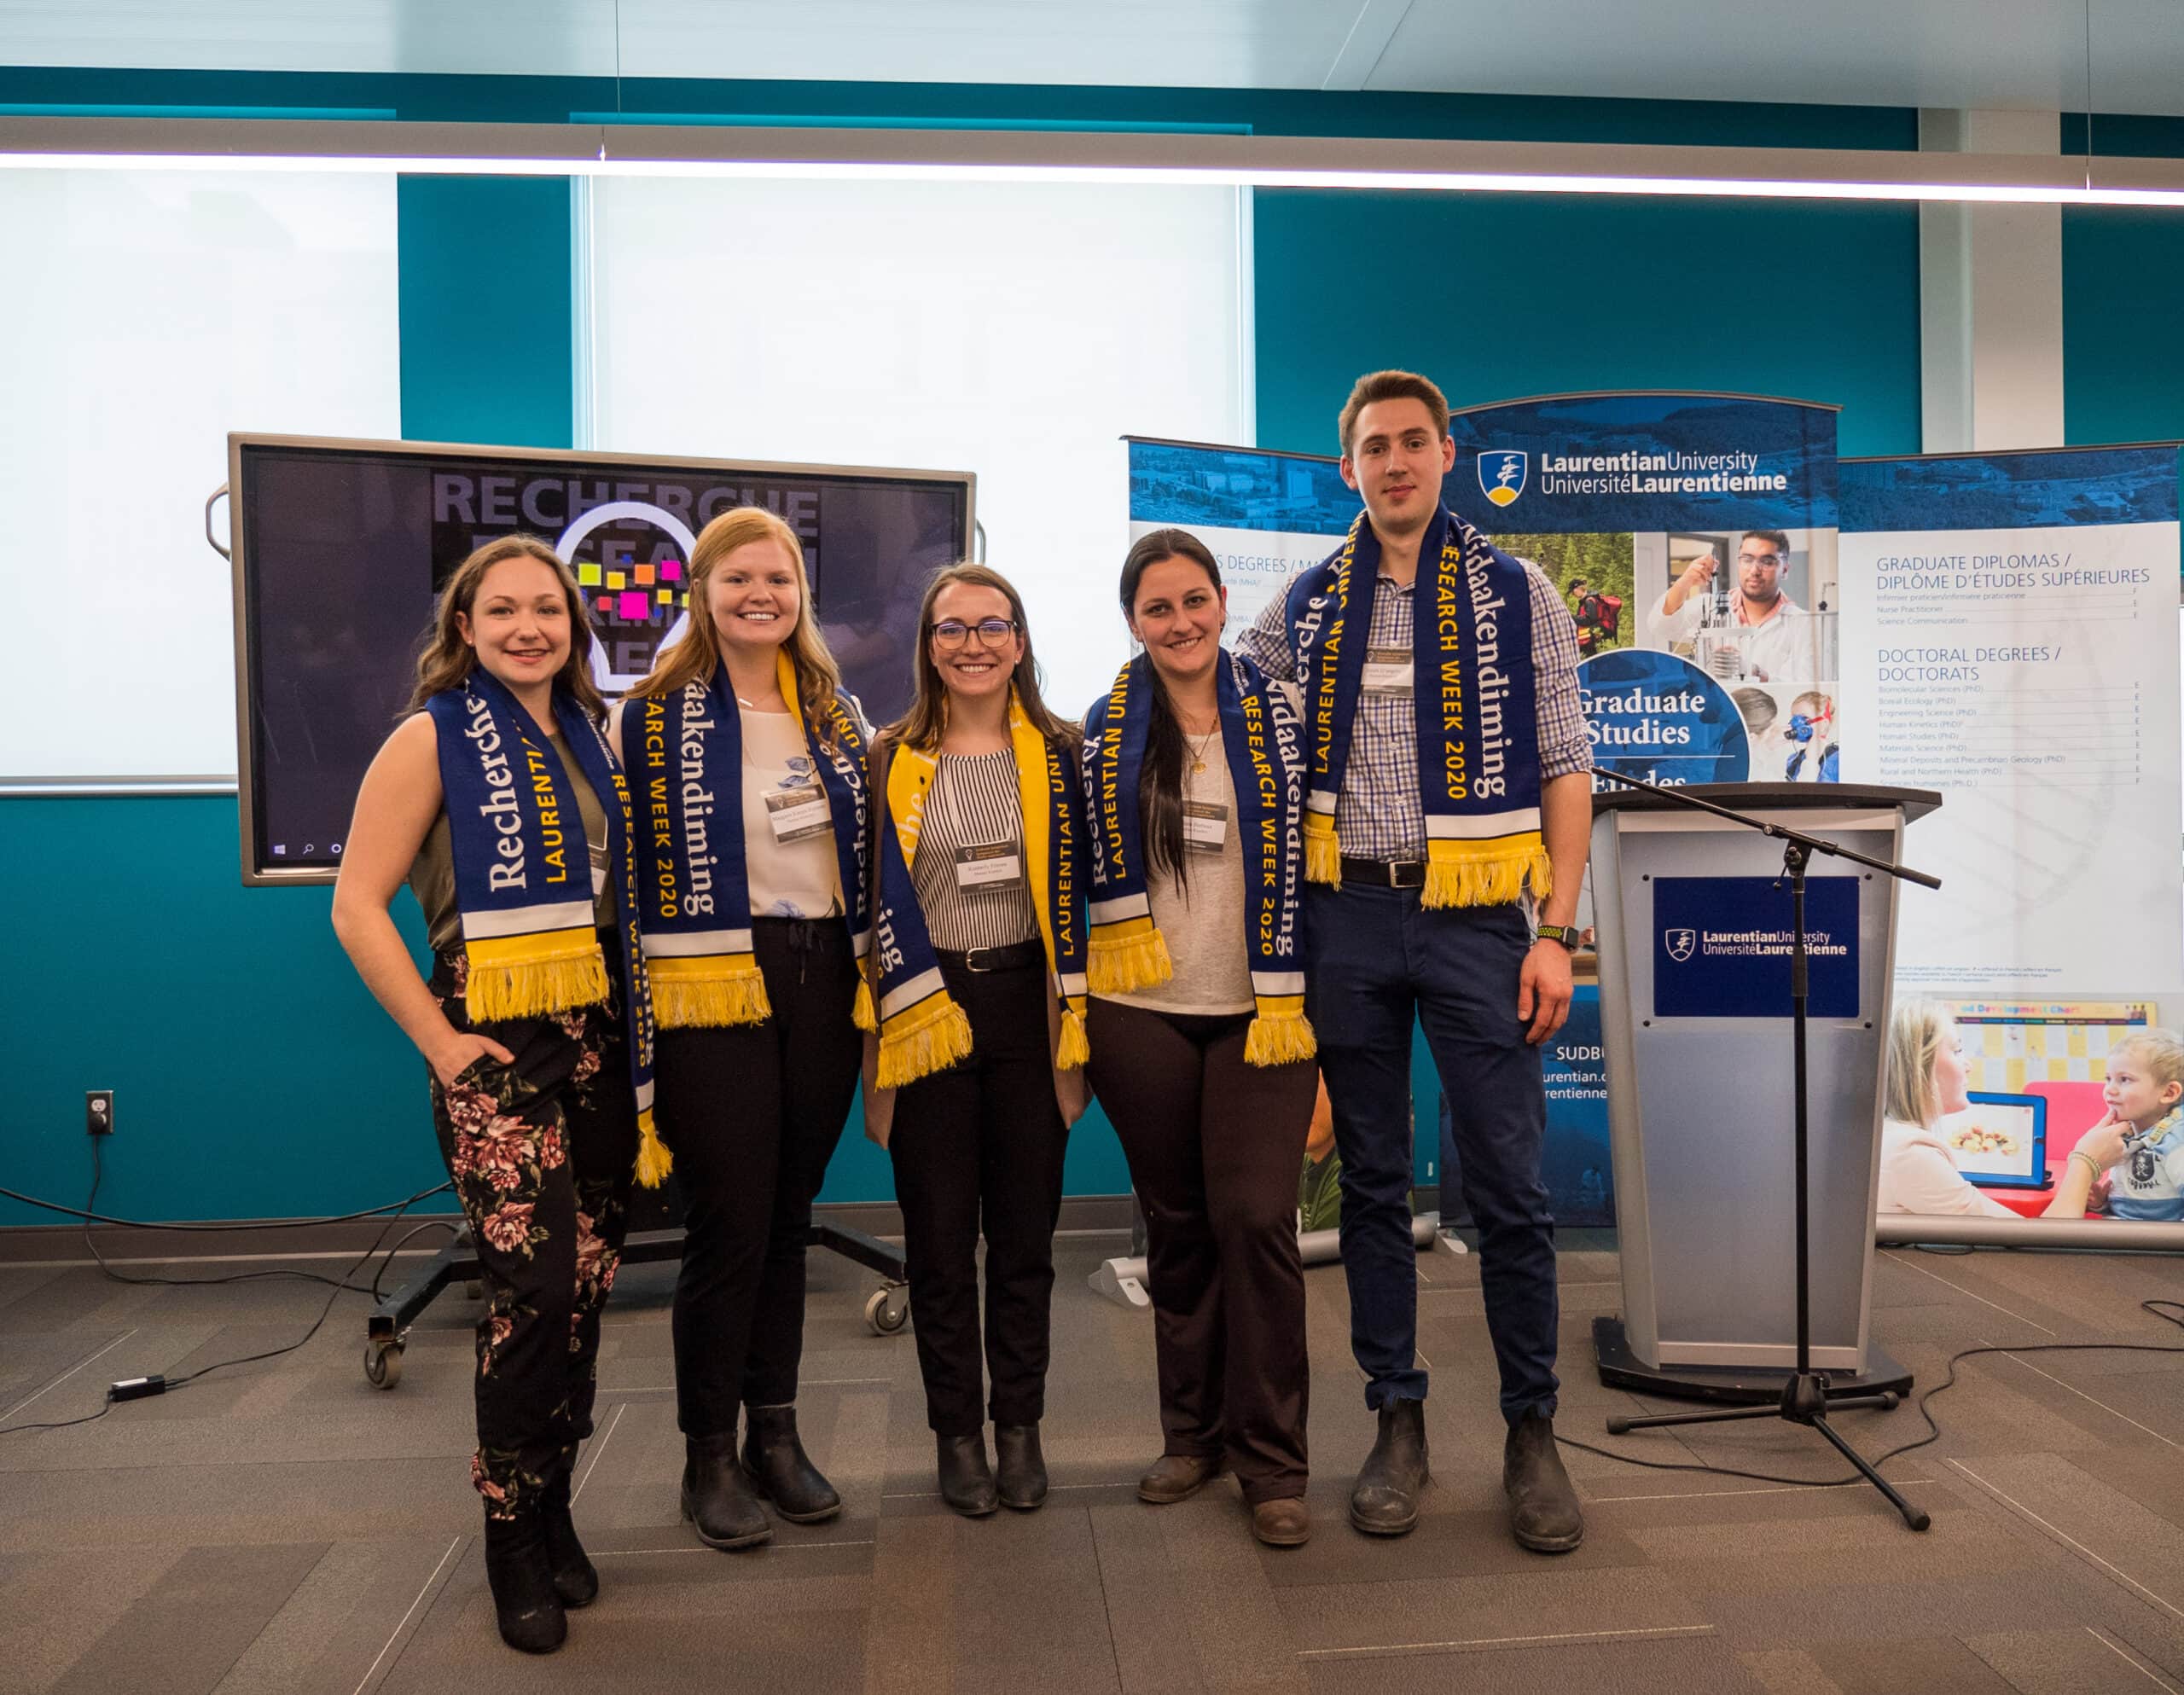 Five students posing beside a podium at Laurentian University's Research Week